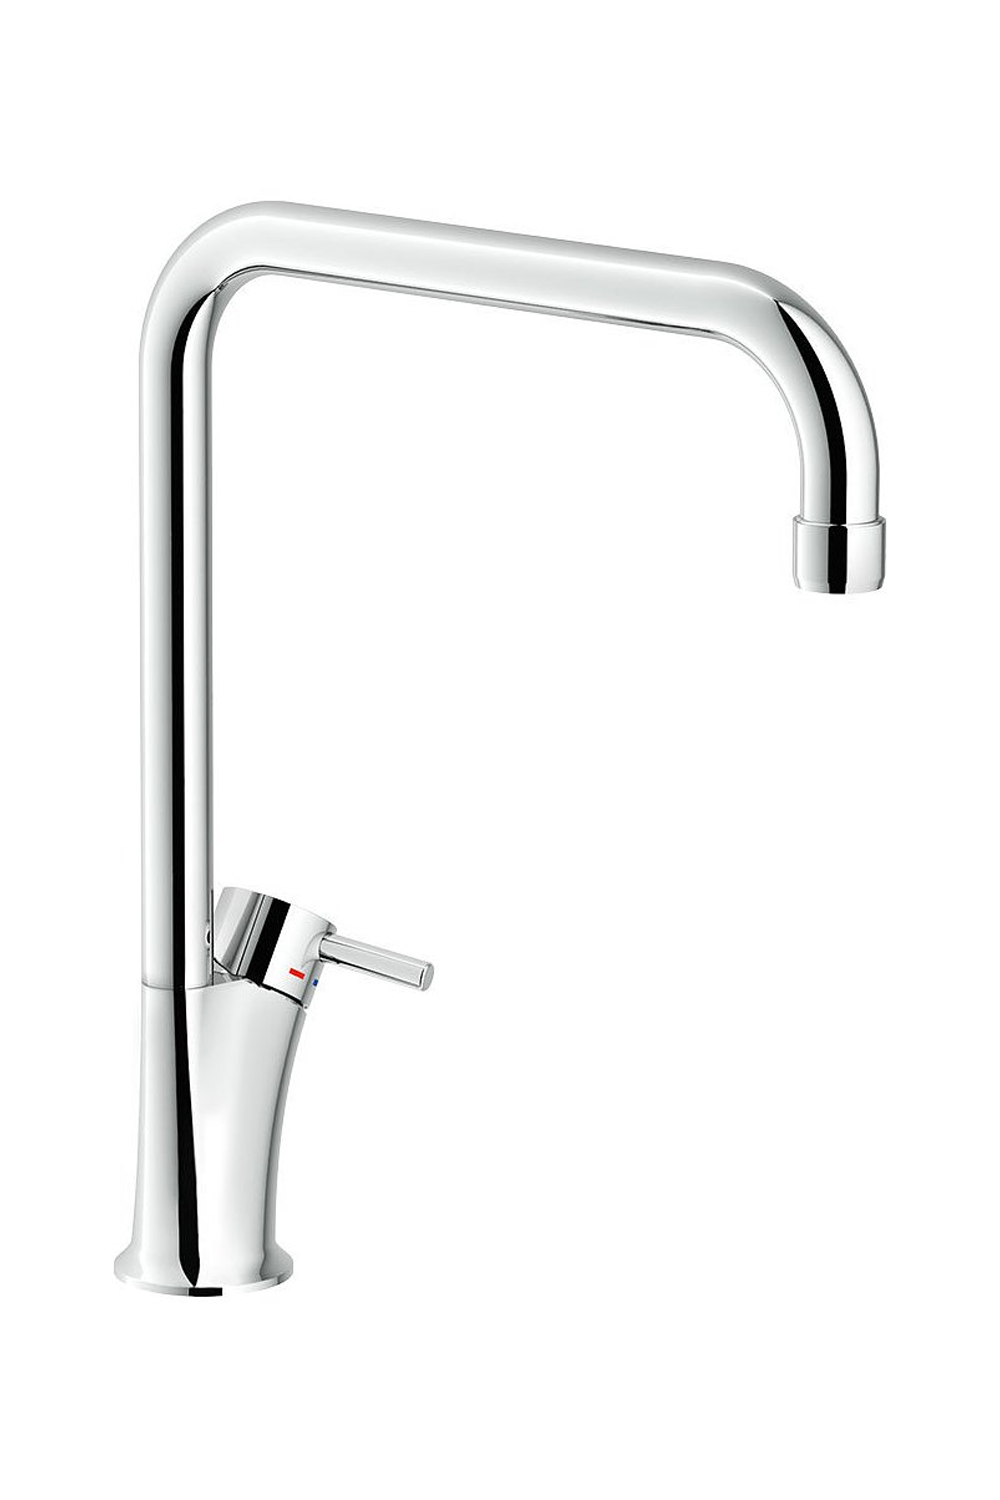 NOBILI CUCI Single Lever Kitchen Sink Mixer CU92813CR | Made in Italy |